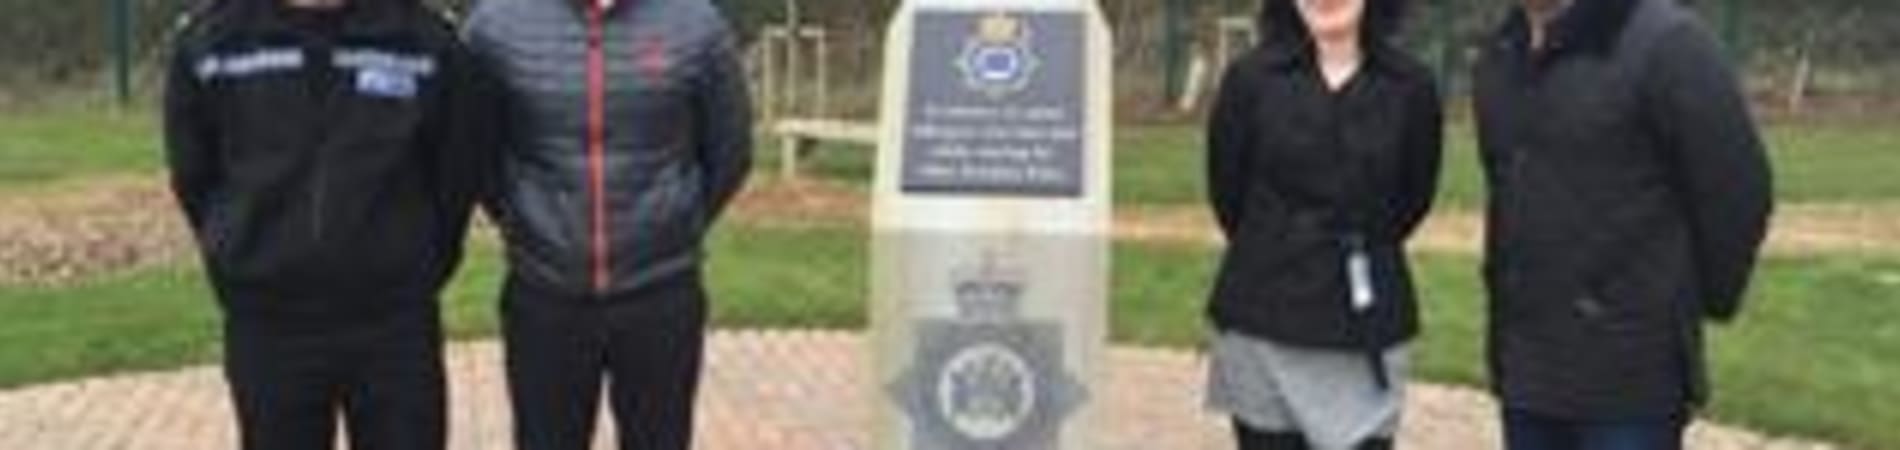 Natural Stone Memorial for West Yorkshire Police